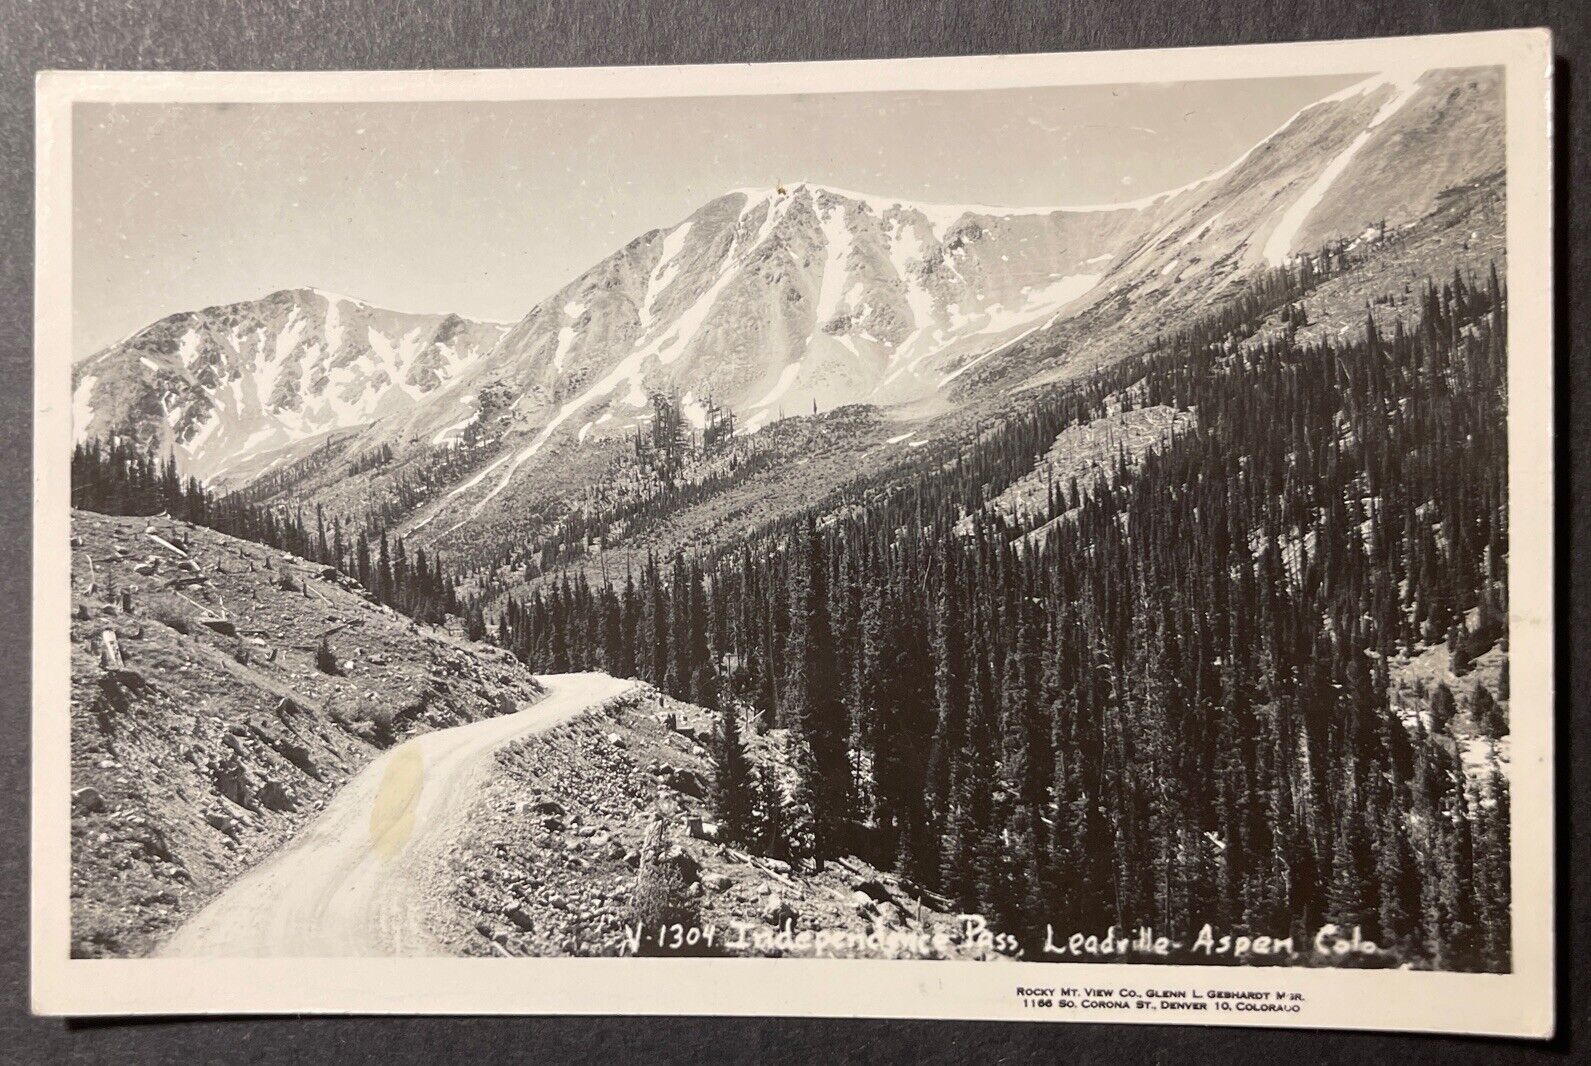 Independence Pass Leadville-Aspen Colorado RPPC Rocky Mt View Co V-1304